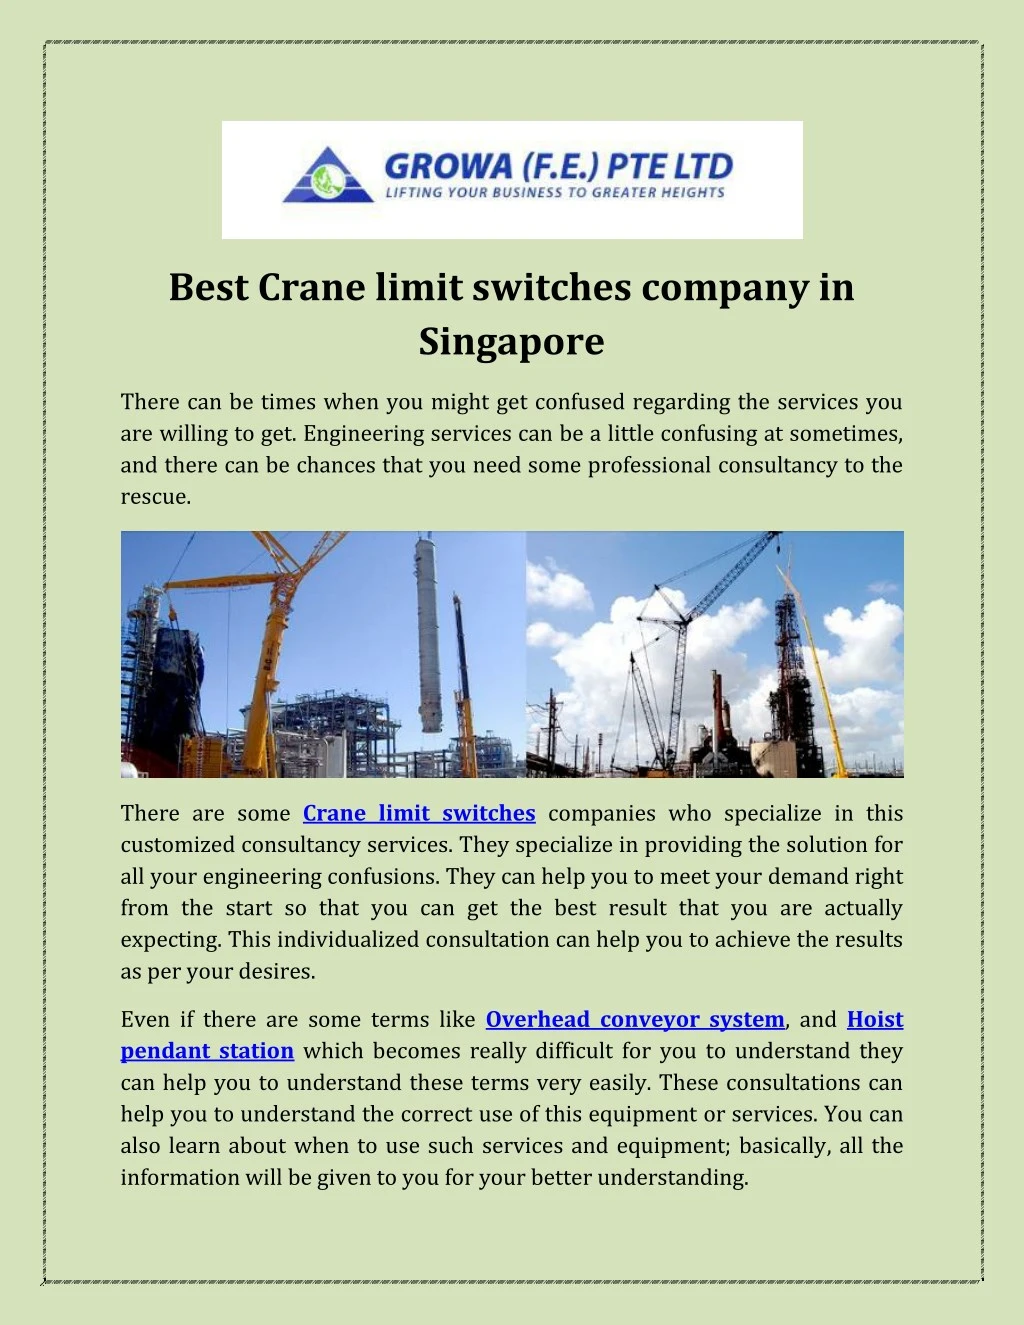 best crane limit switches company in singapore